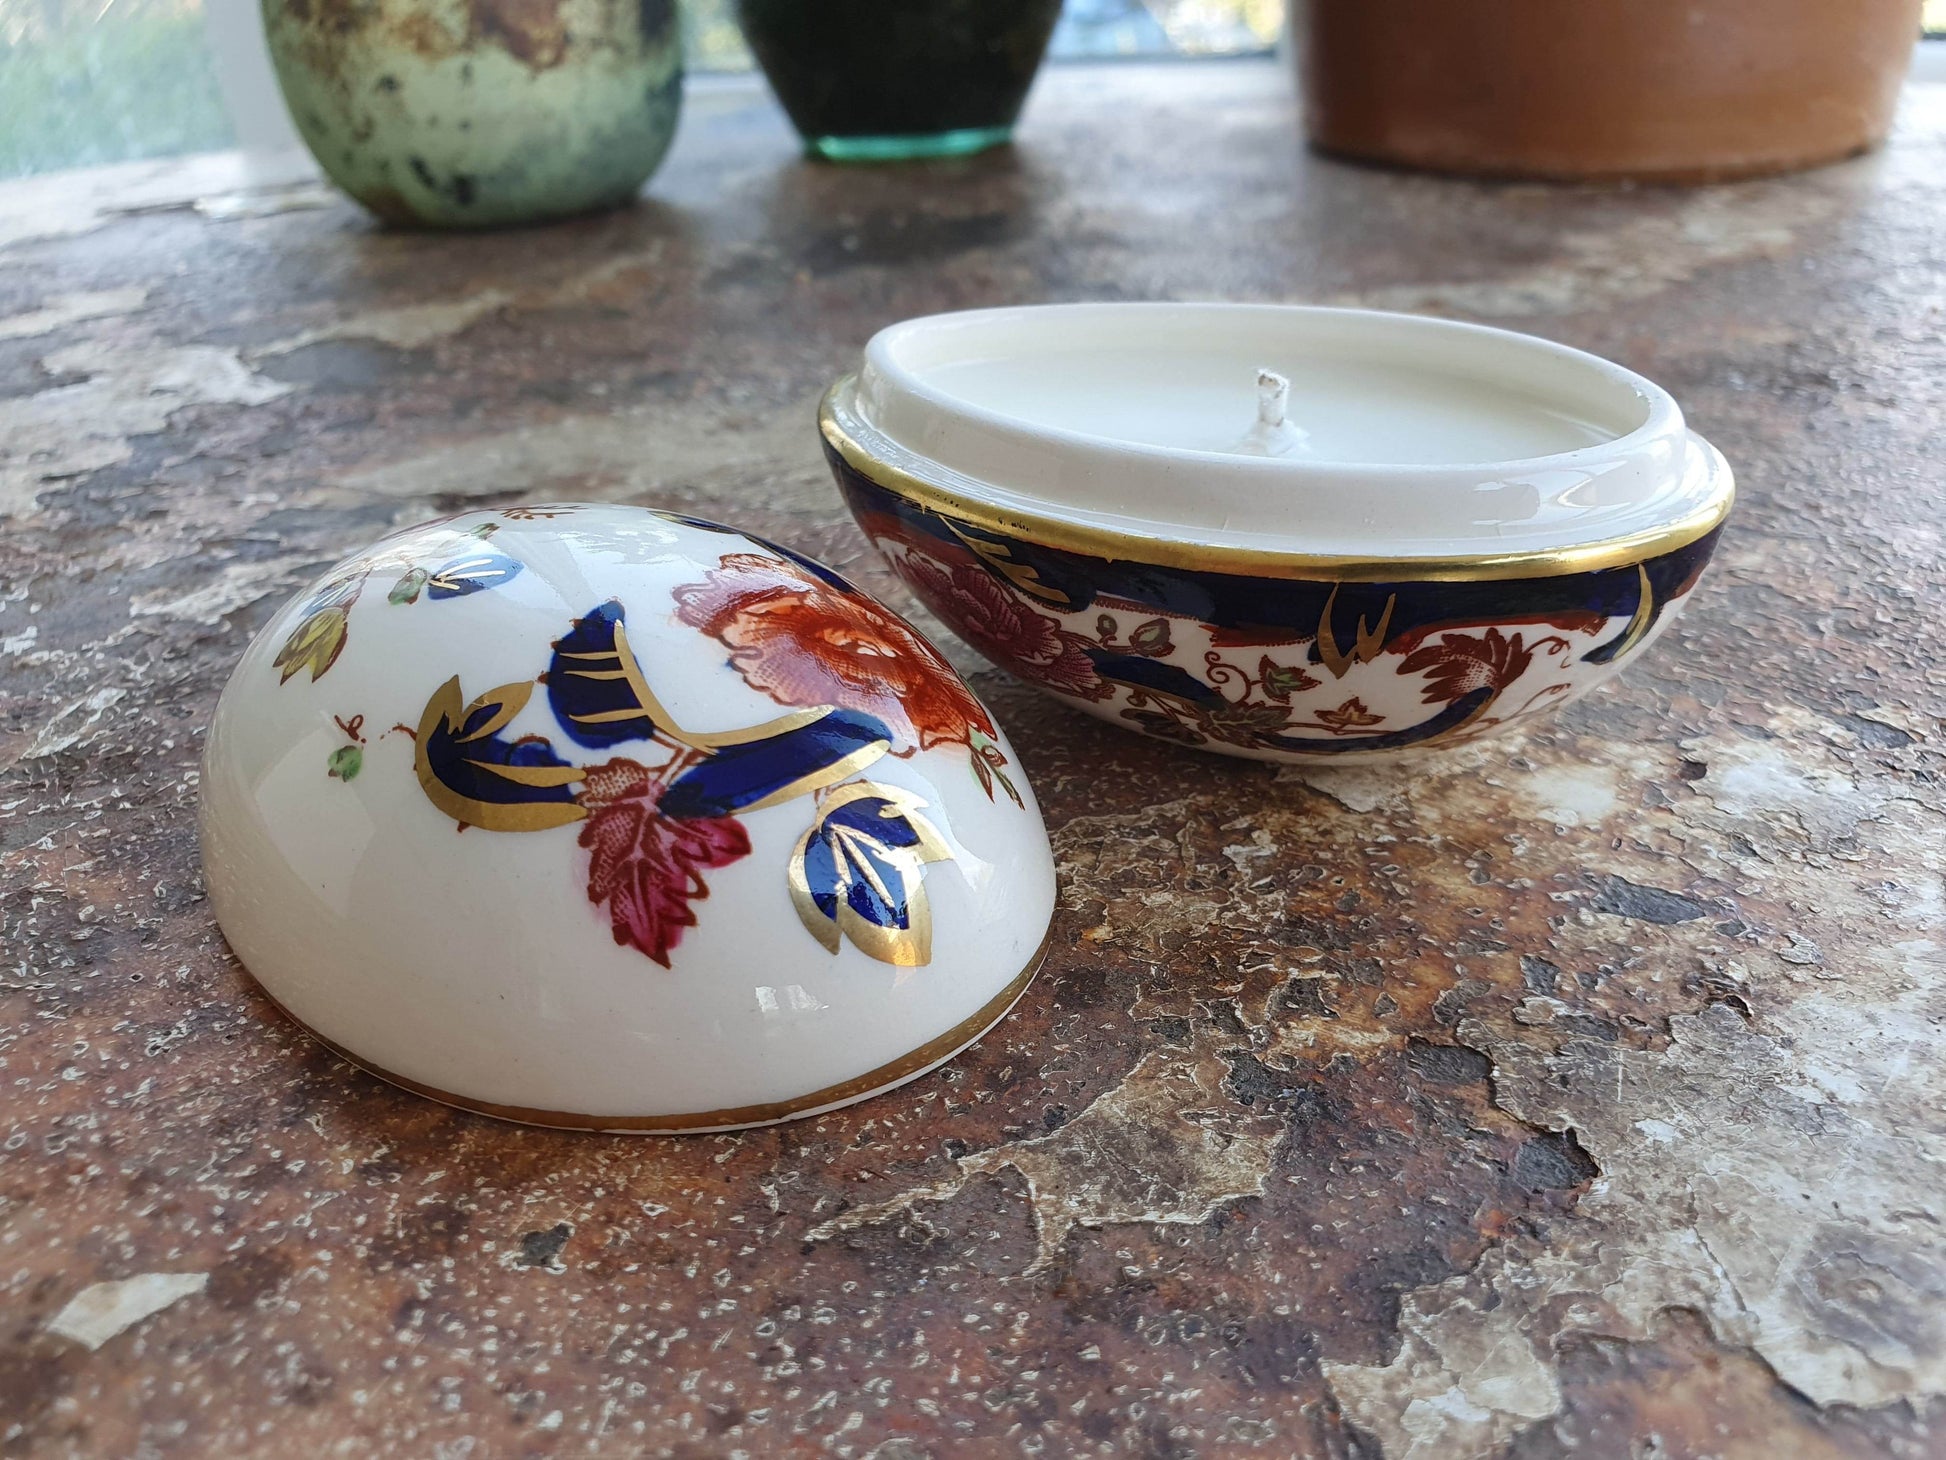 Egg shaped trinket dish candle Ralph's Orchard 